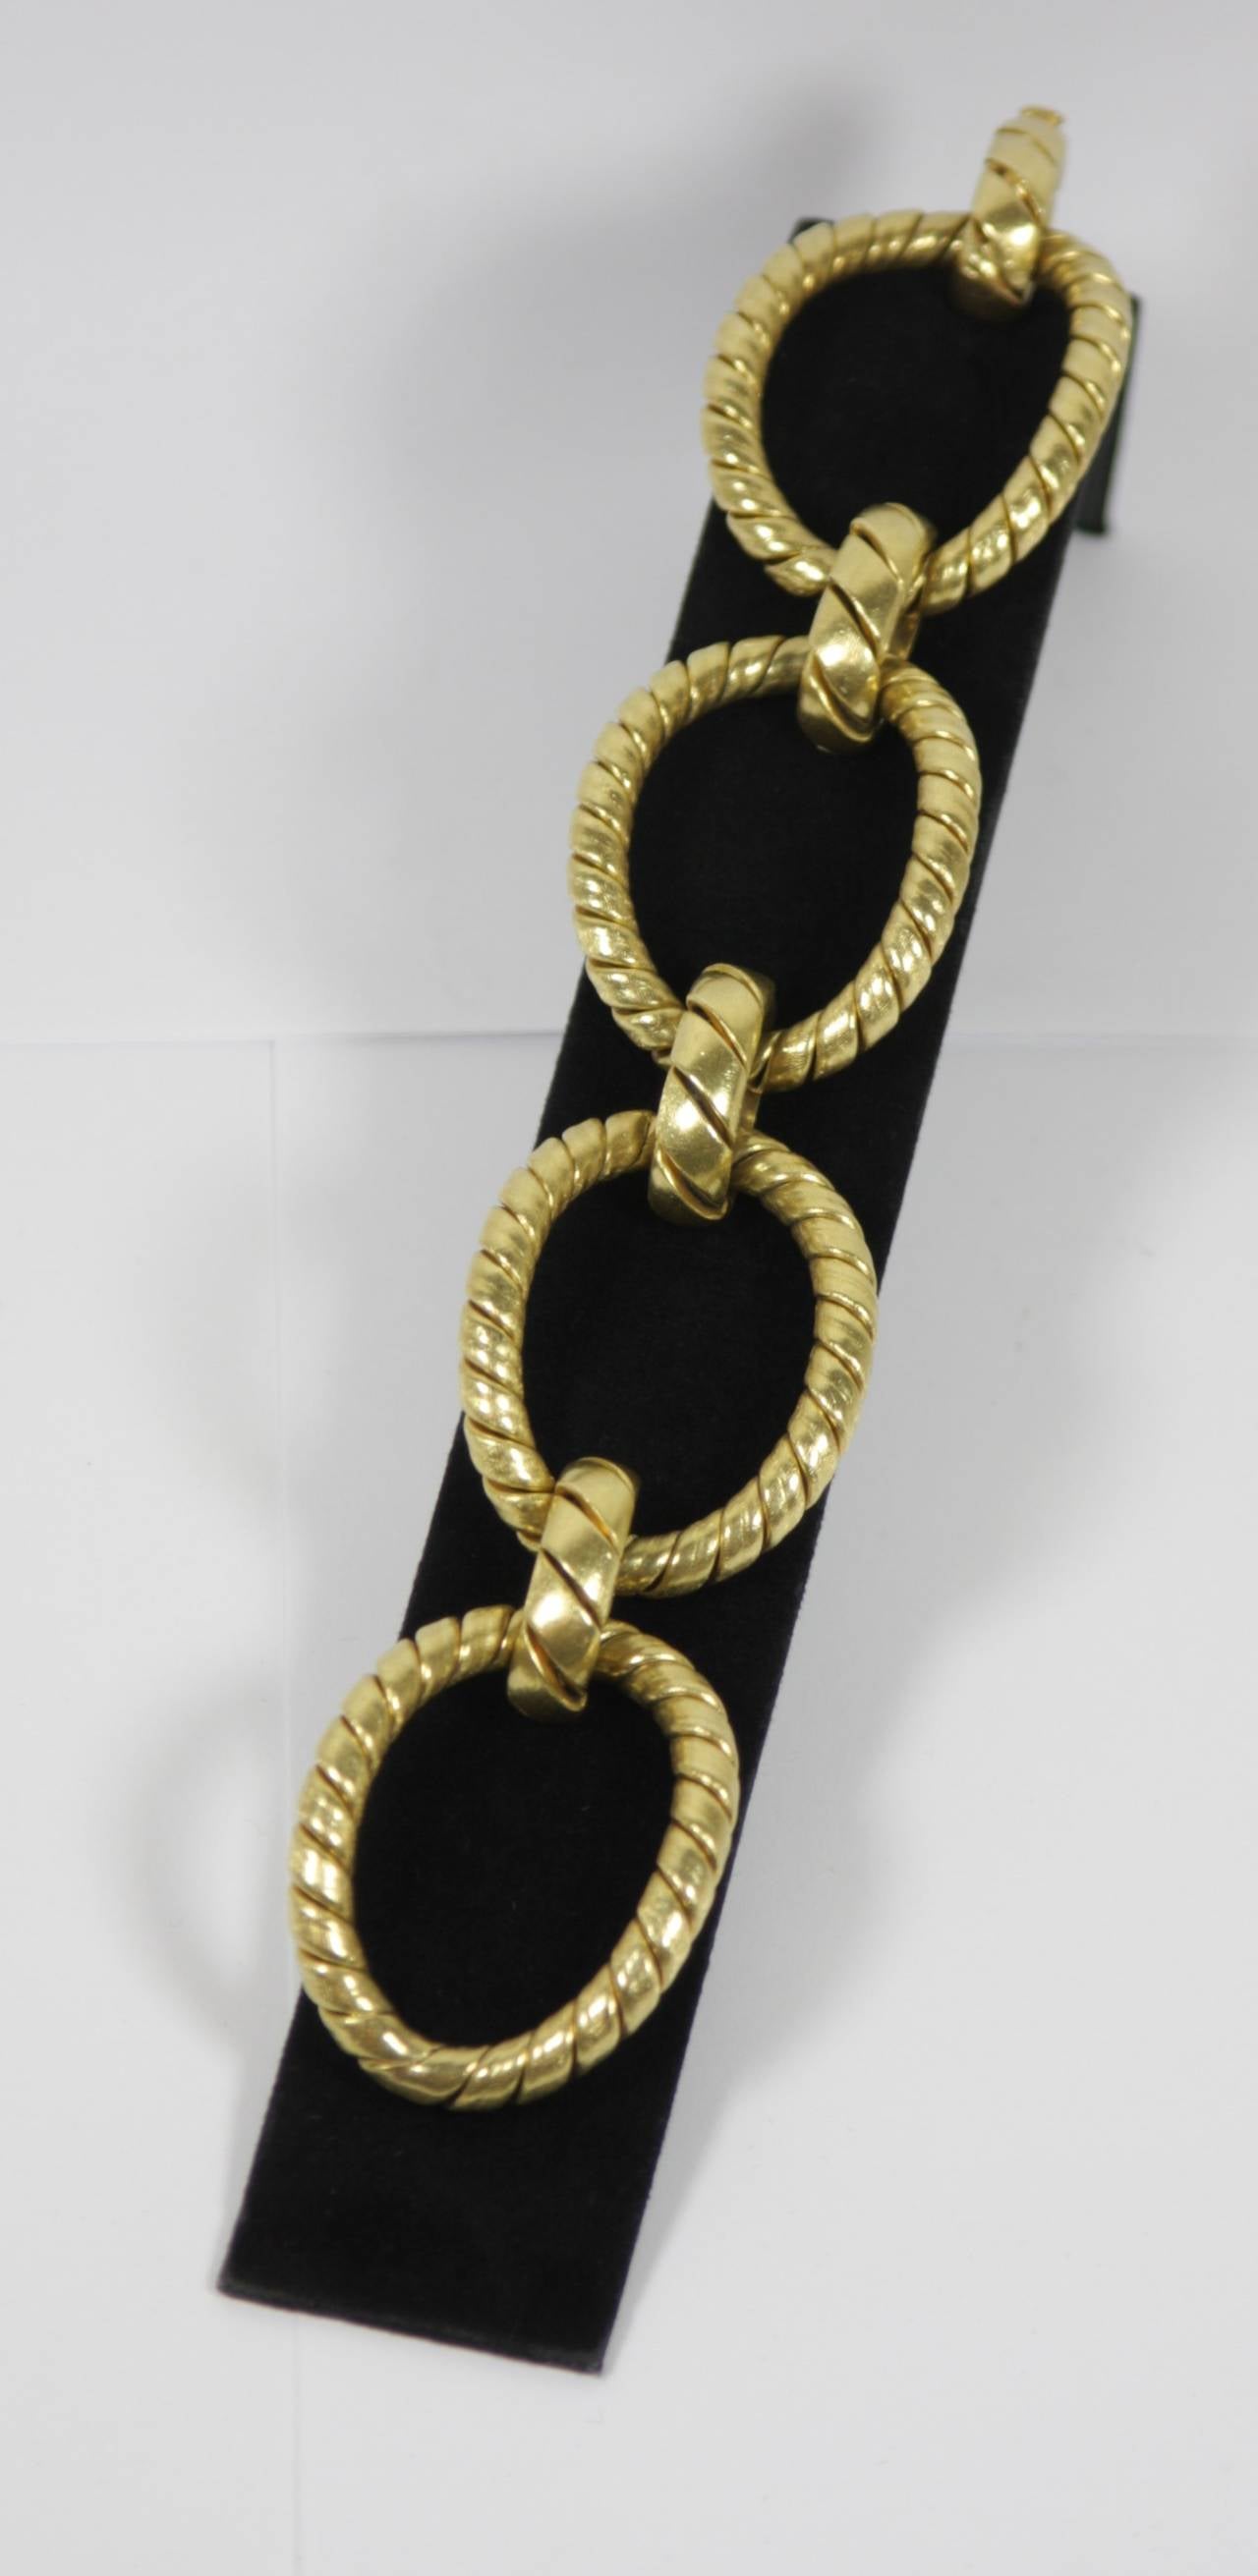 The bracelet is composed of a textured 18KT yellow gold. An absolutely stunning design. 

Specs:
18 KT Textured Yellow Gold
Gold: 89.3 Grams
Length 8 inches
Link Height 1.5 inches